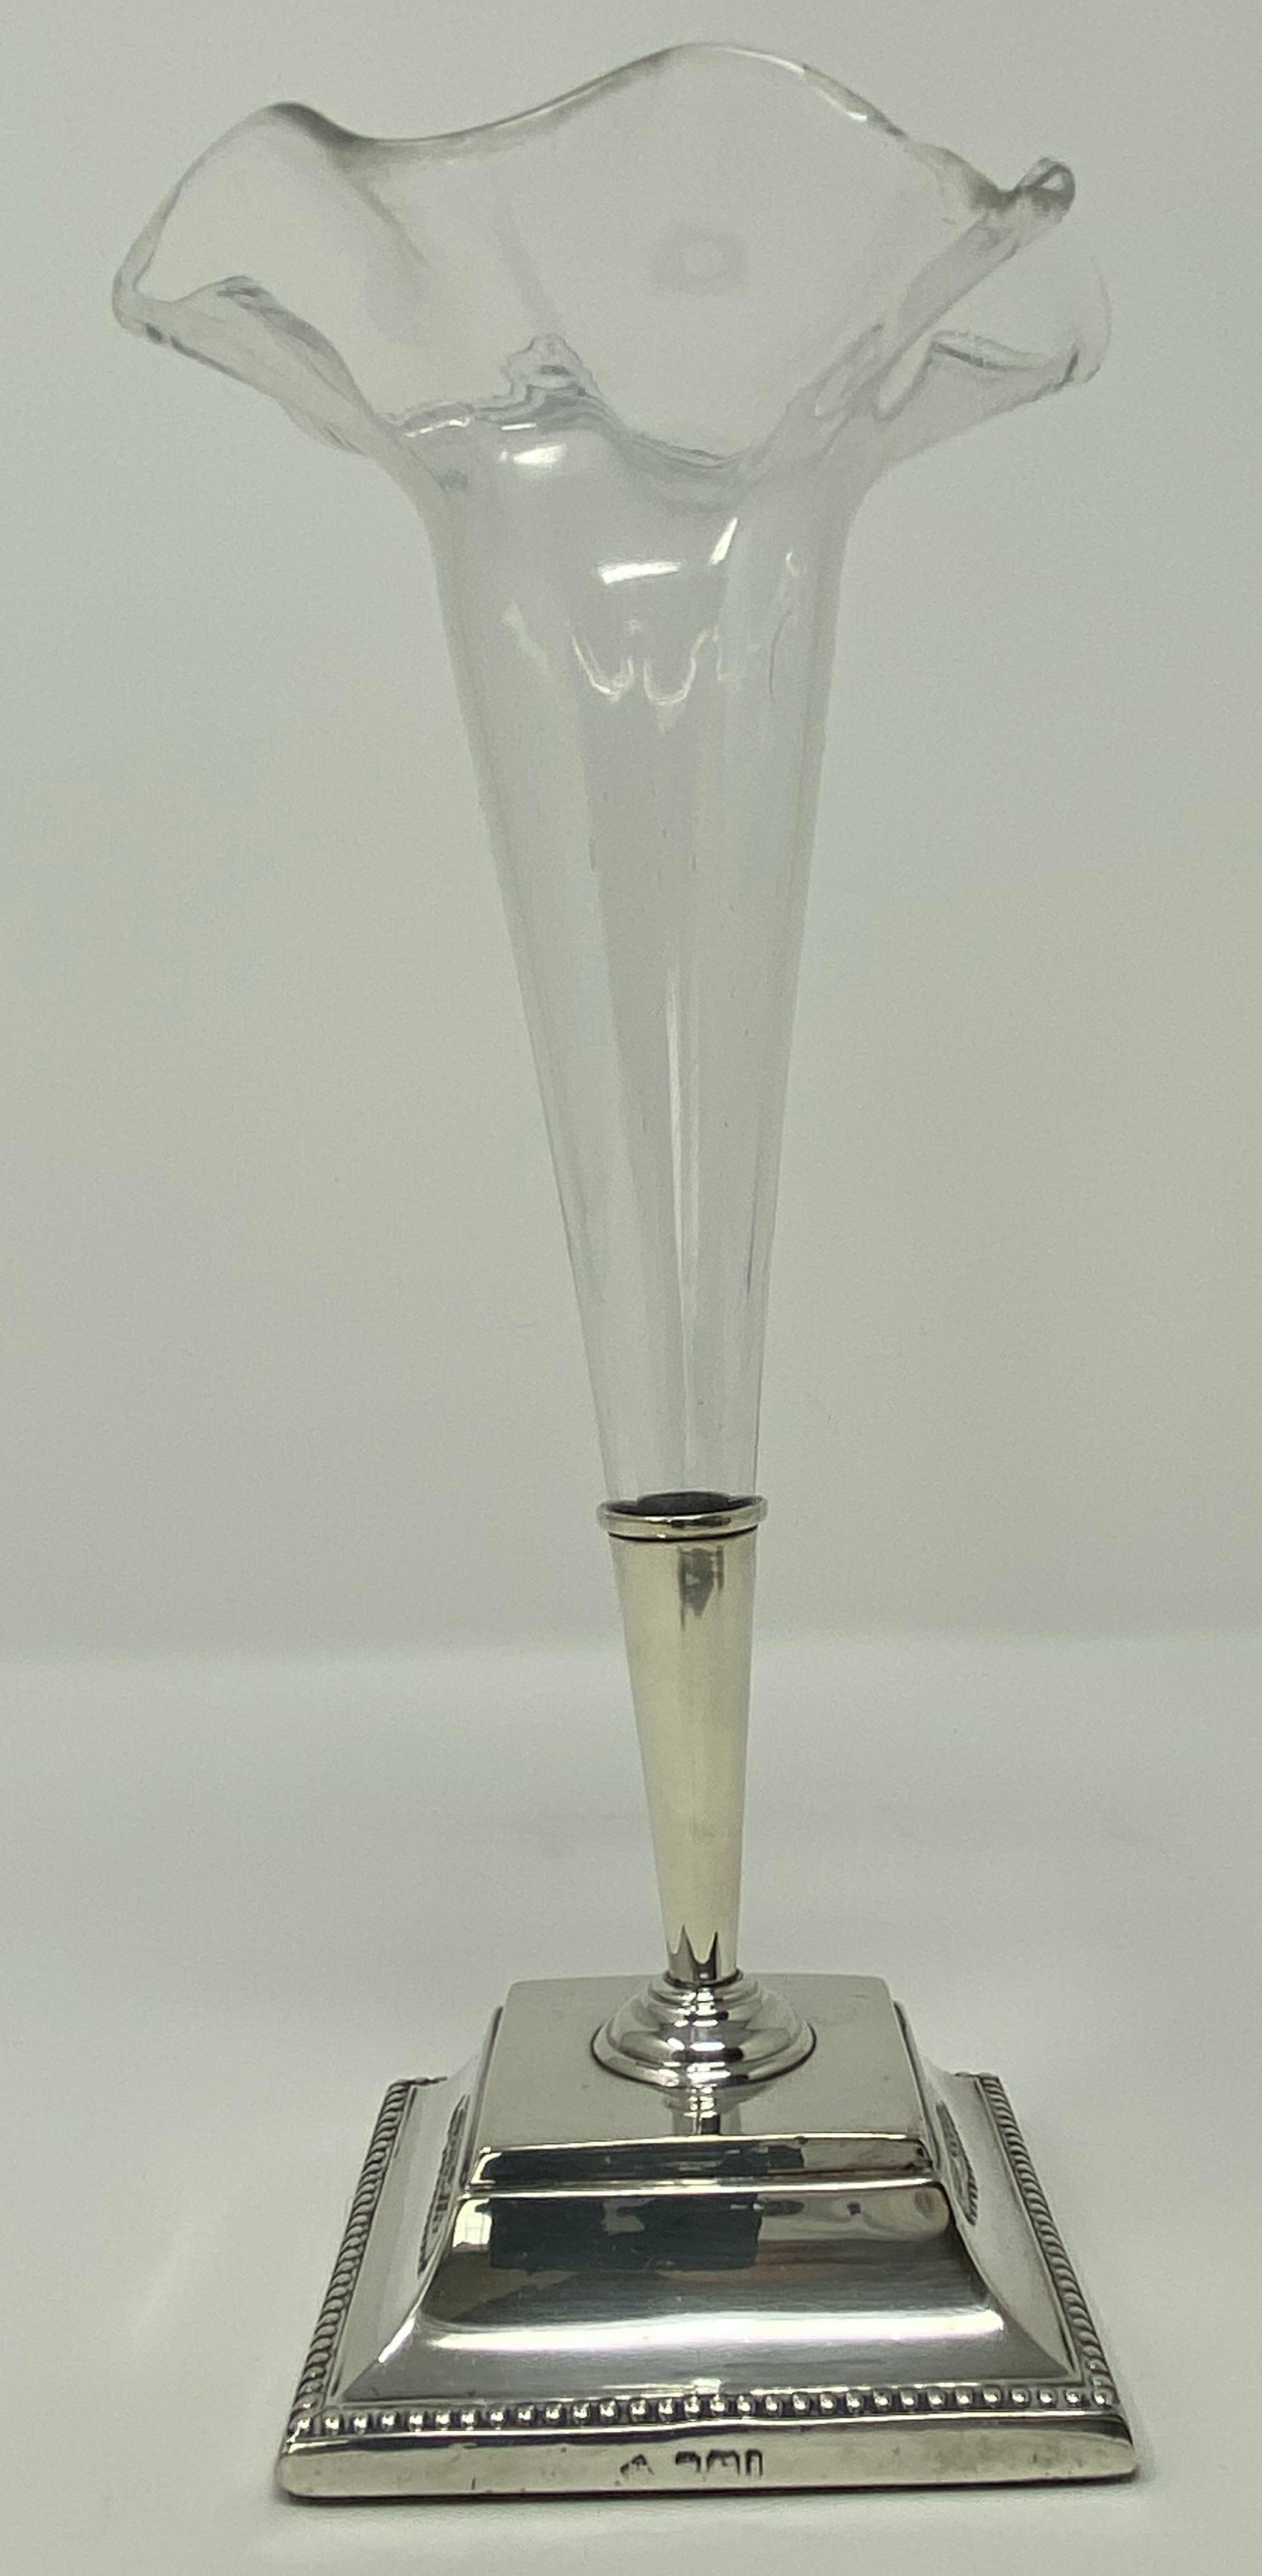 Antique Silver and Glass Spill Vase